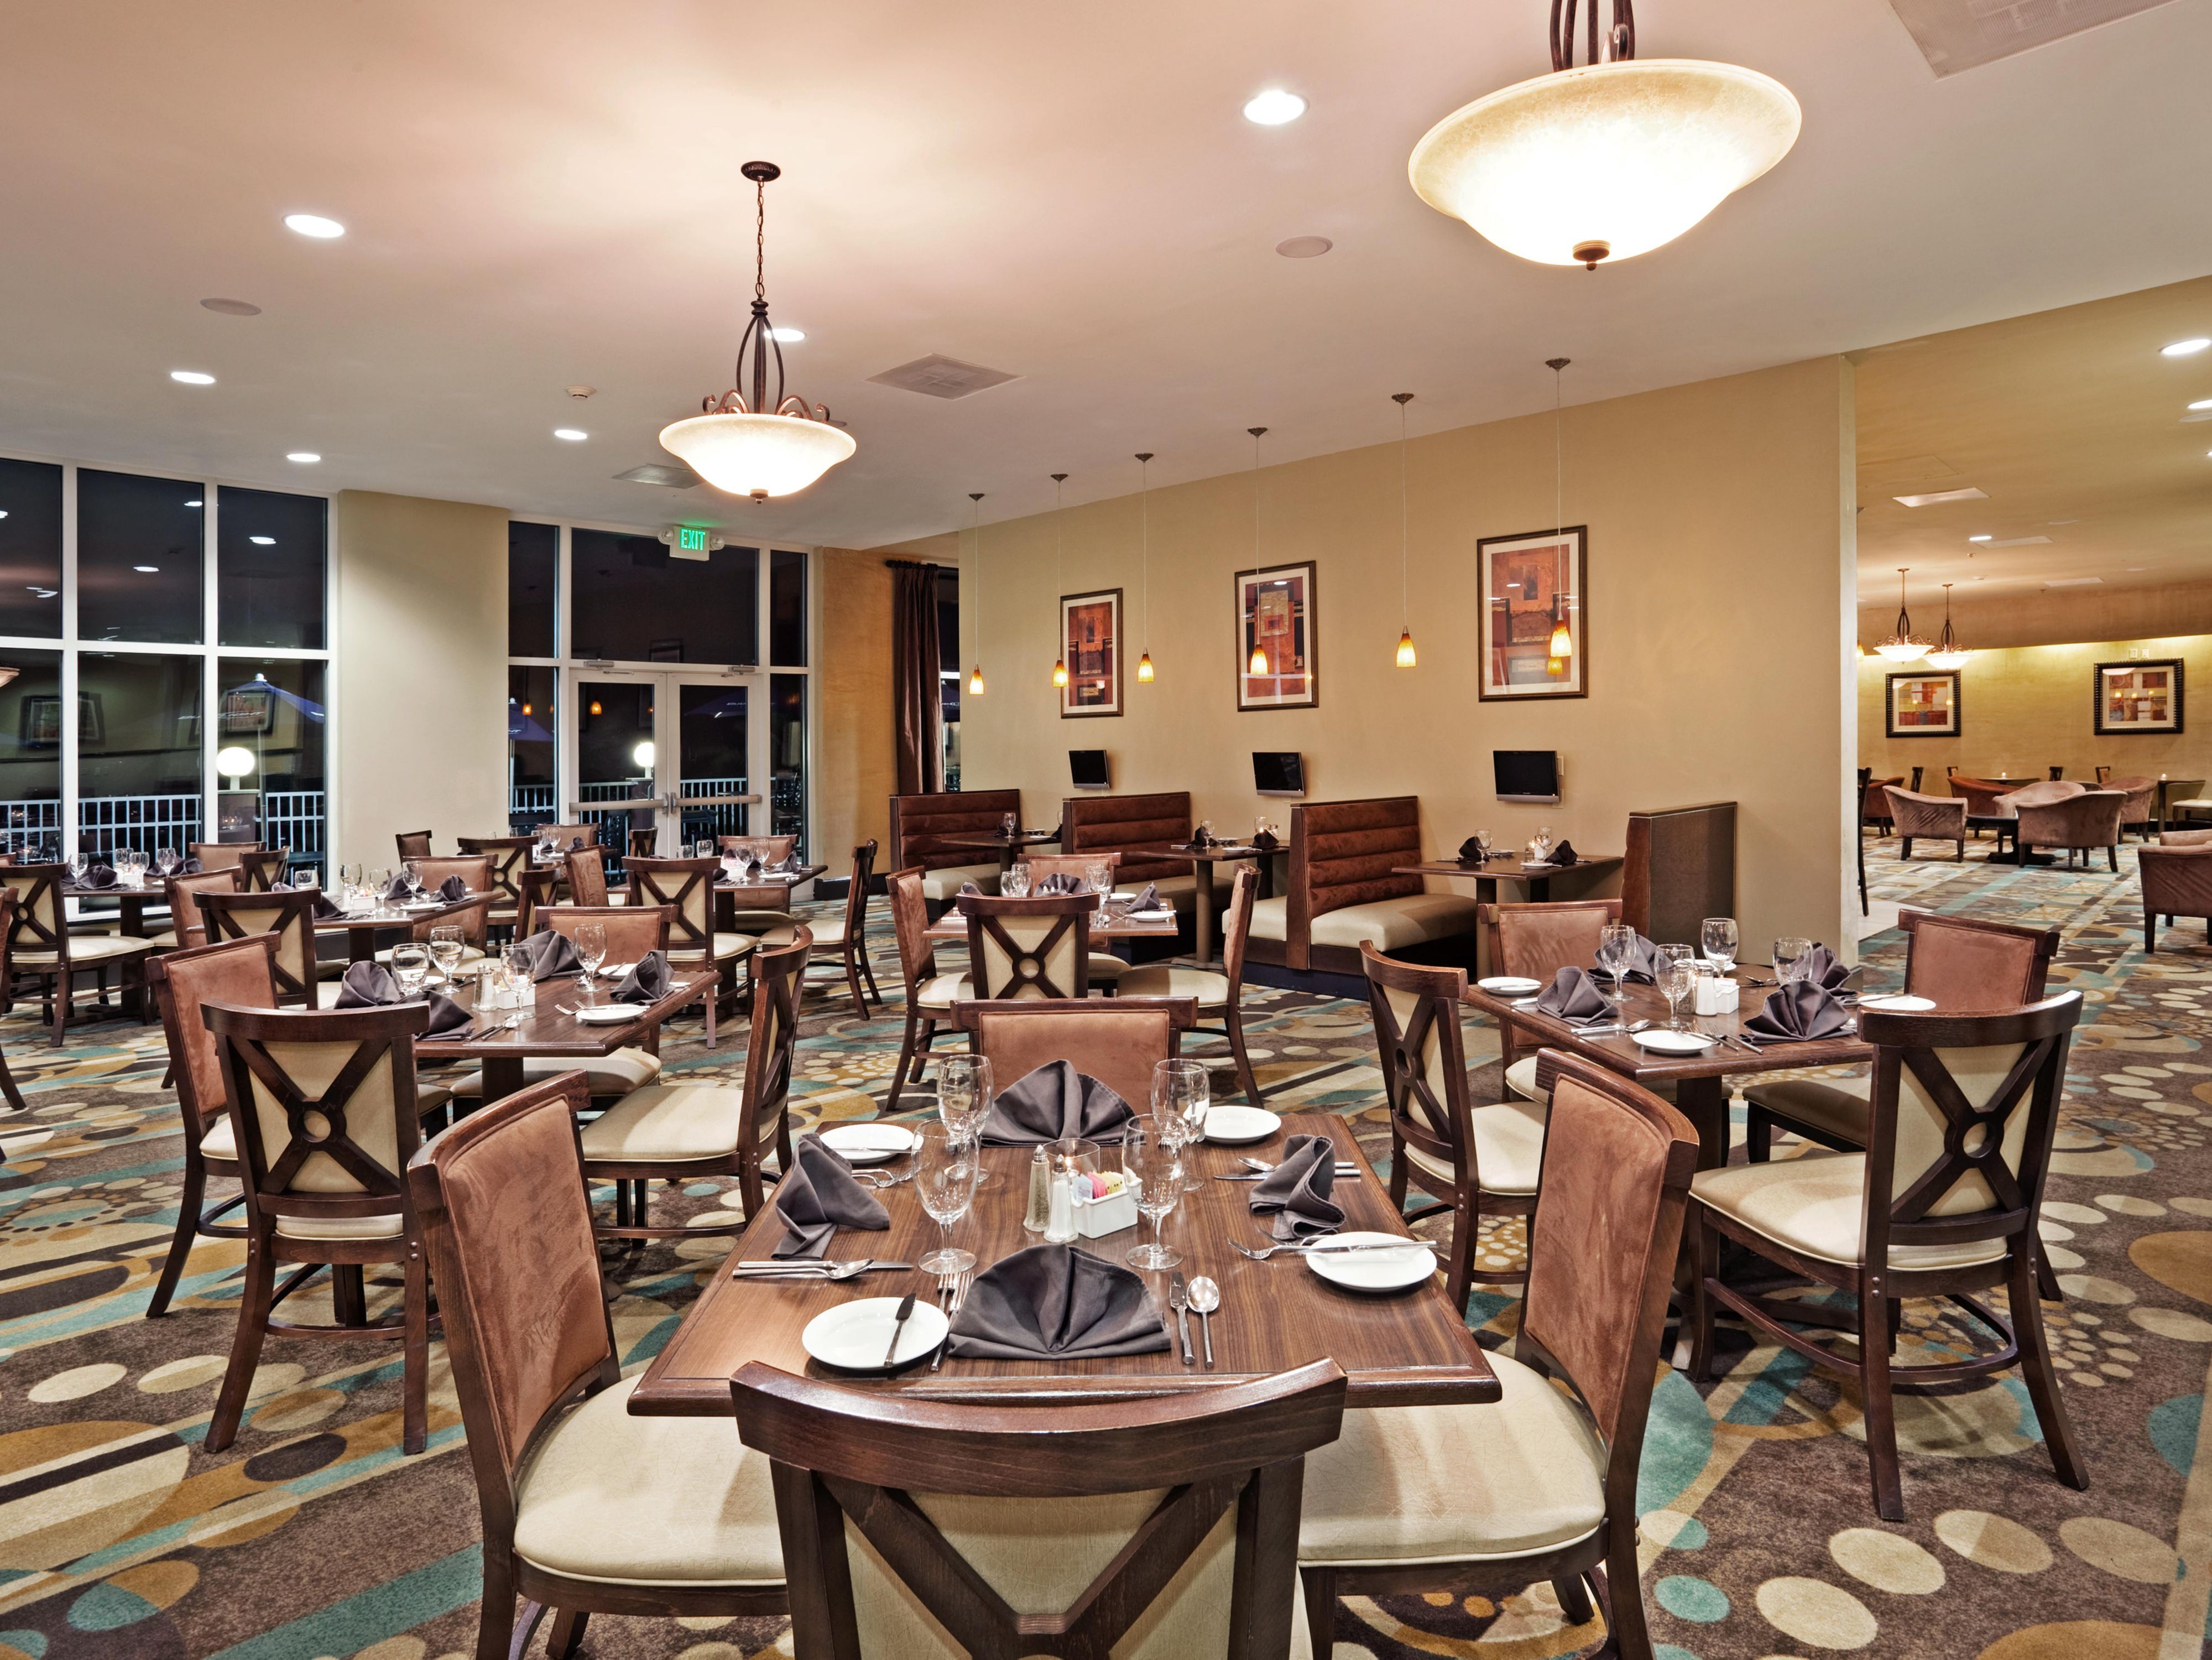 The Albergotti Grill offers breakfast and dinner.  Our dinner menu offers lowcountry seafood and steaks prepared by our local chef.  Dine in our spacious restaurant, outside on the patio overlooking the beautiful Beaufort River or take out.